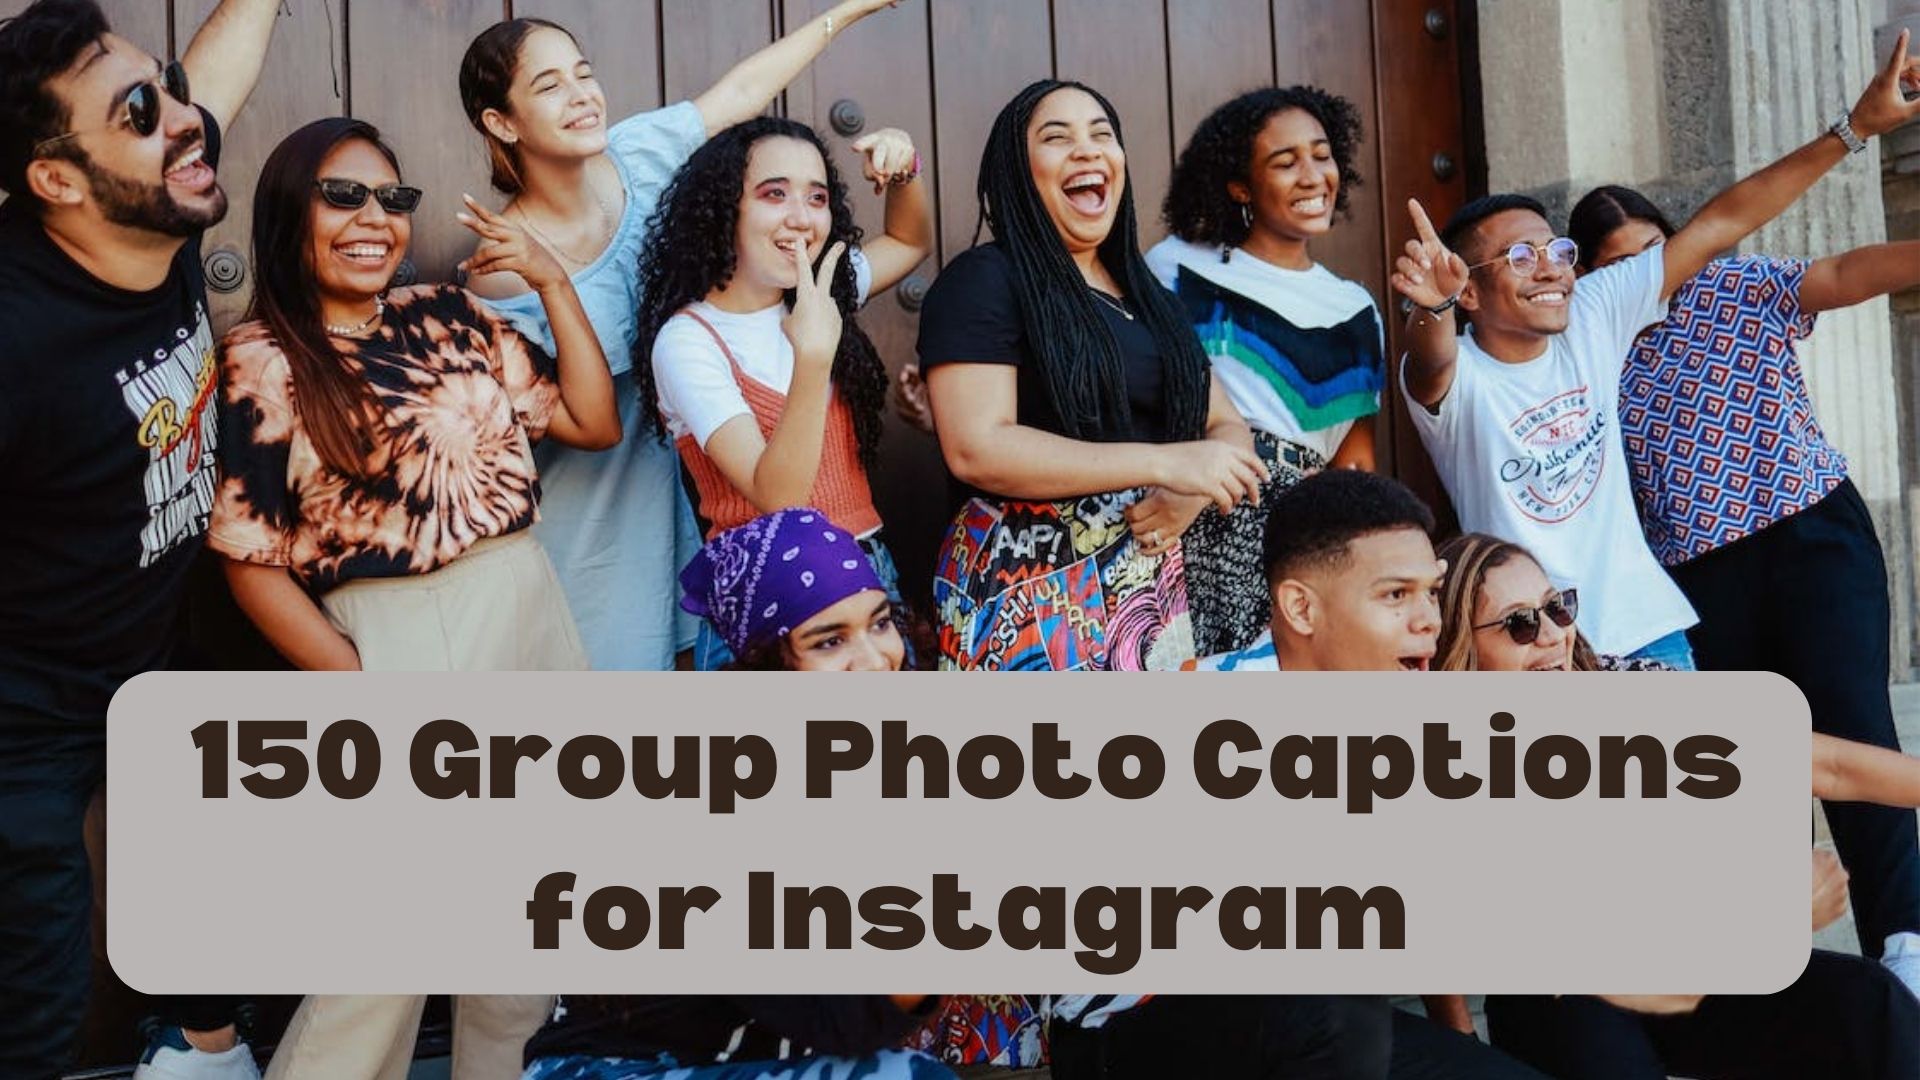 Group Photo Captions for Instagram